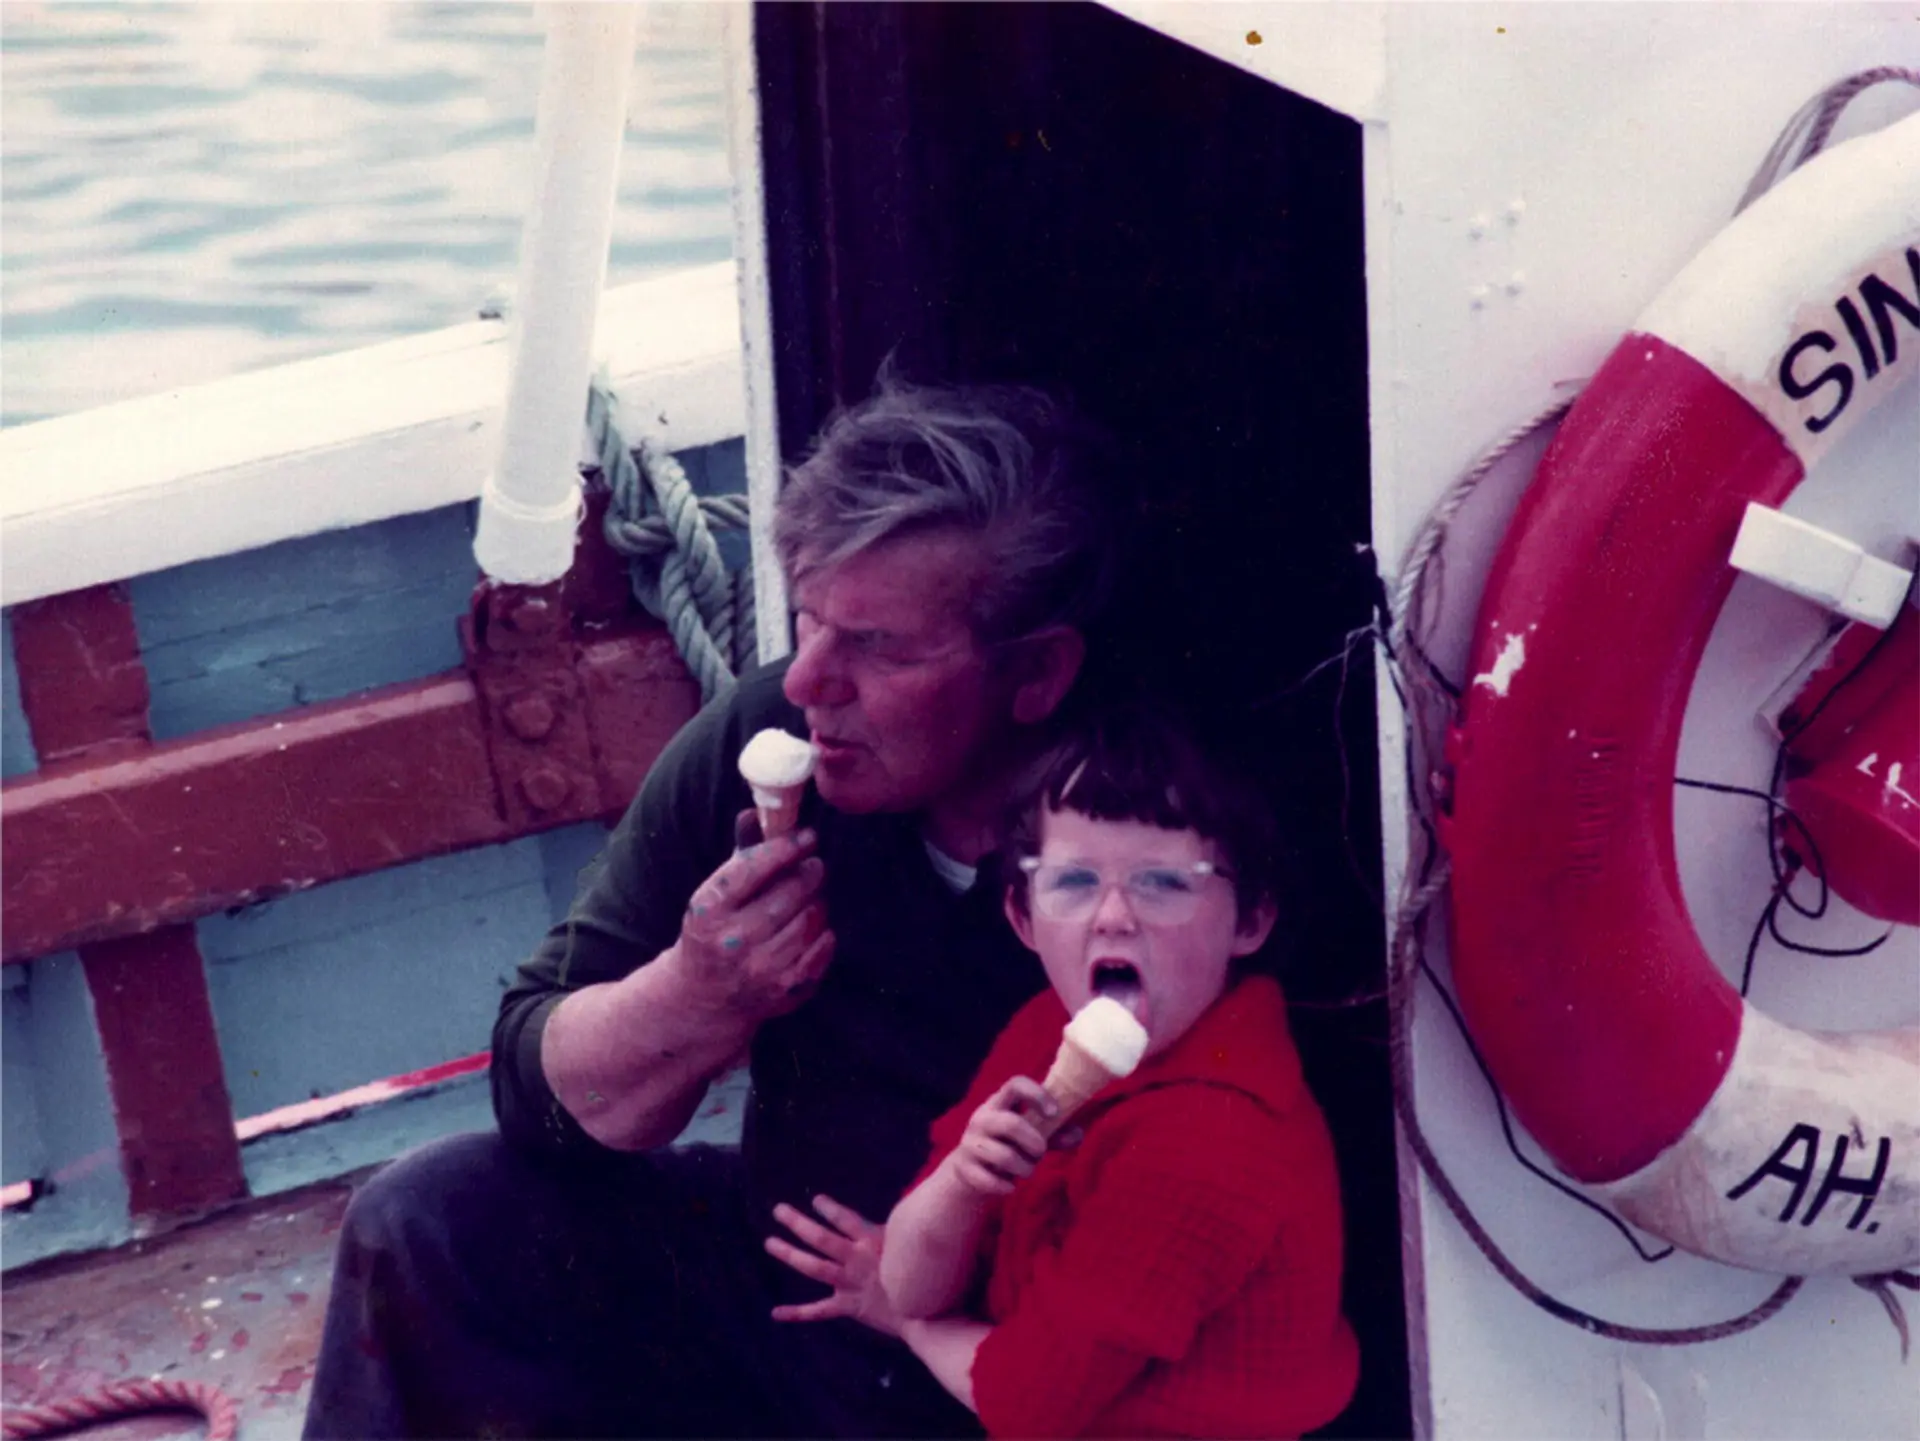 An image from the past, a man and child are eating ice creams in cones on a fishing boat. We can see a red and white lifebuoy.